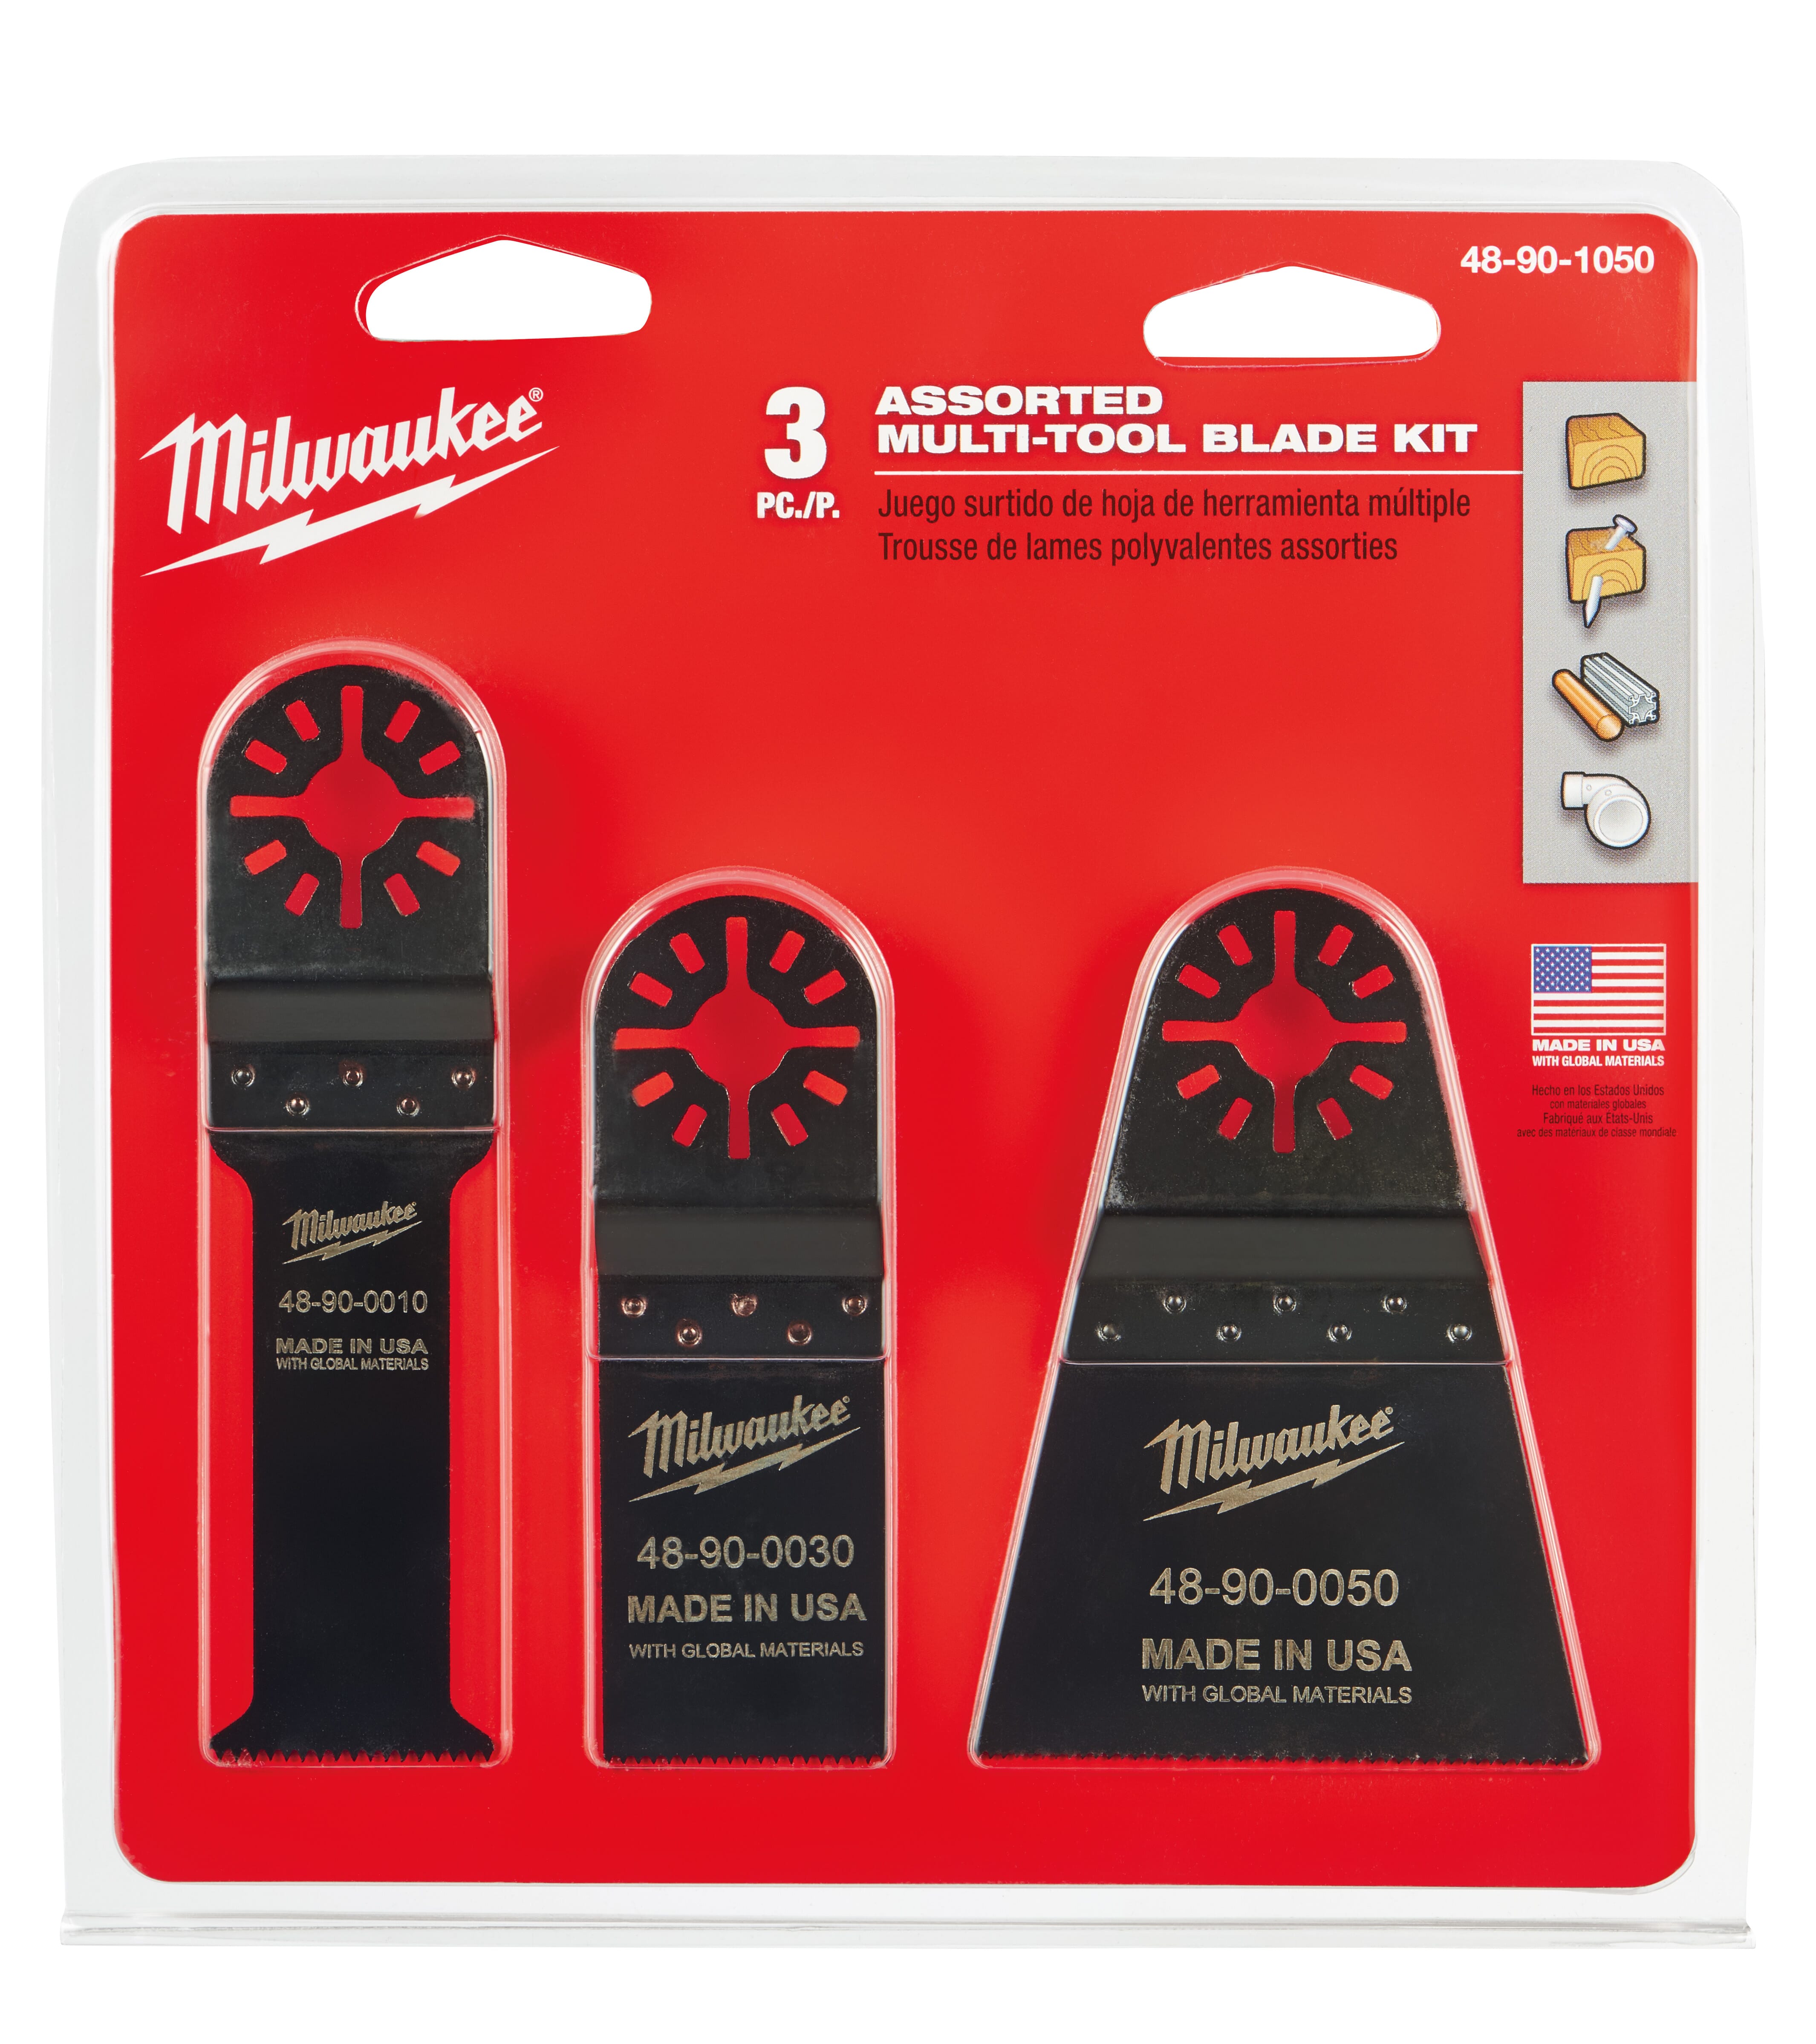 Milwaukee® 48-90-1050 Assorted Multi-Tool Blade Kit, For Use With Professional Grade Multi-Oscillating Tool, 3-Piece, 1-1/4 and 2-1/2 in Size, Bi-Metal/High Carbon Steel